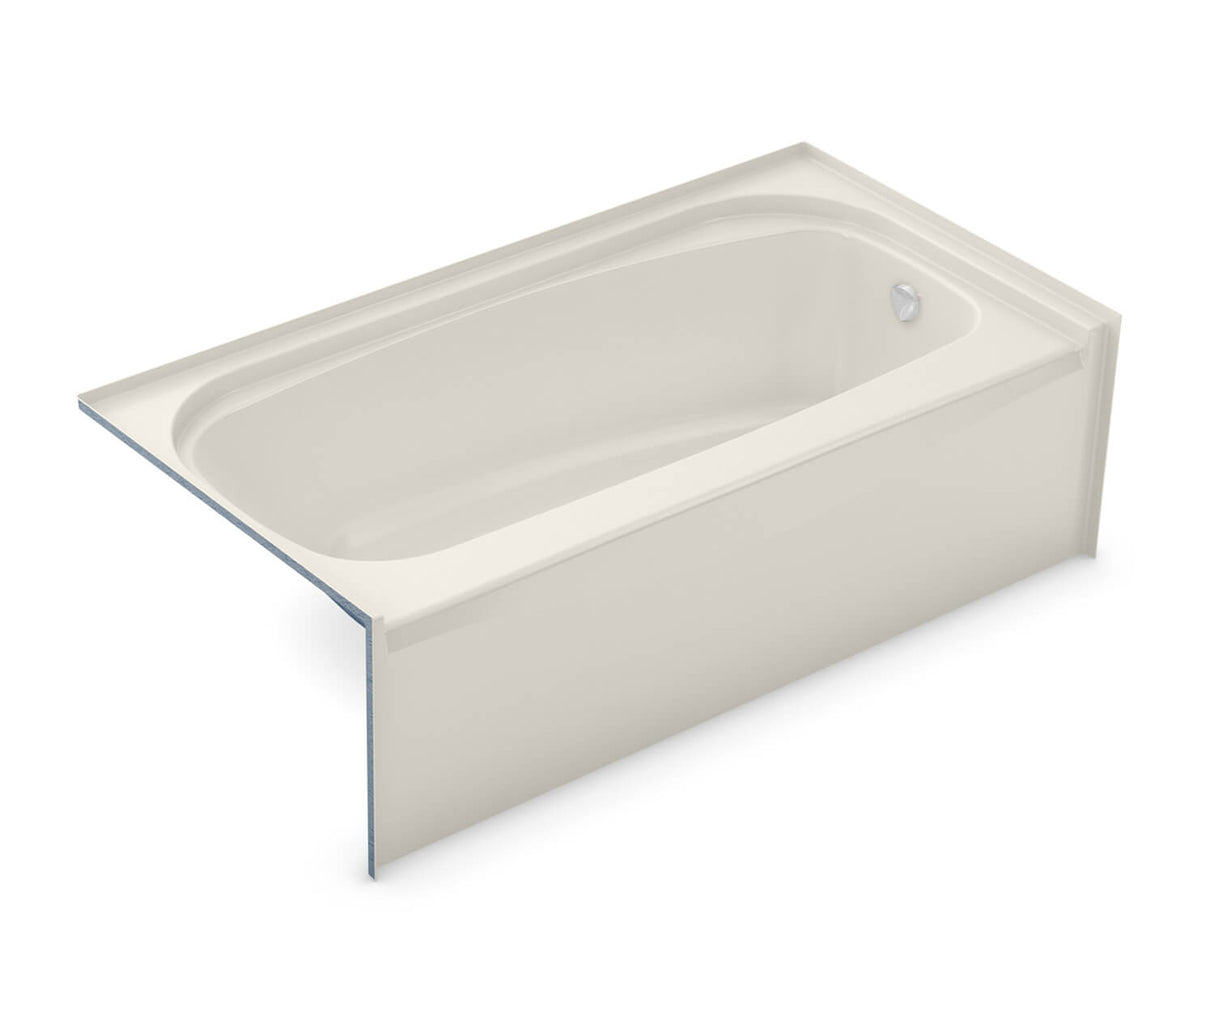 Aker TOF-3060 AcrylX Alcove Left-Hand Drain Bath in Biscuit